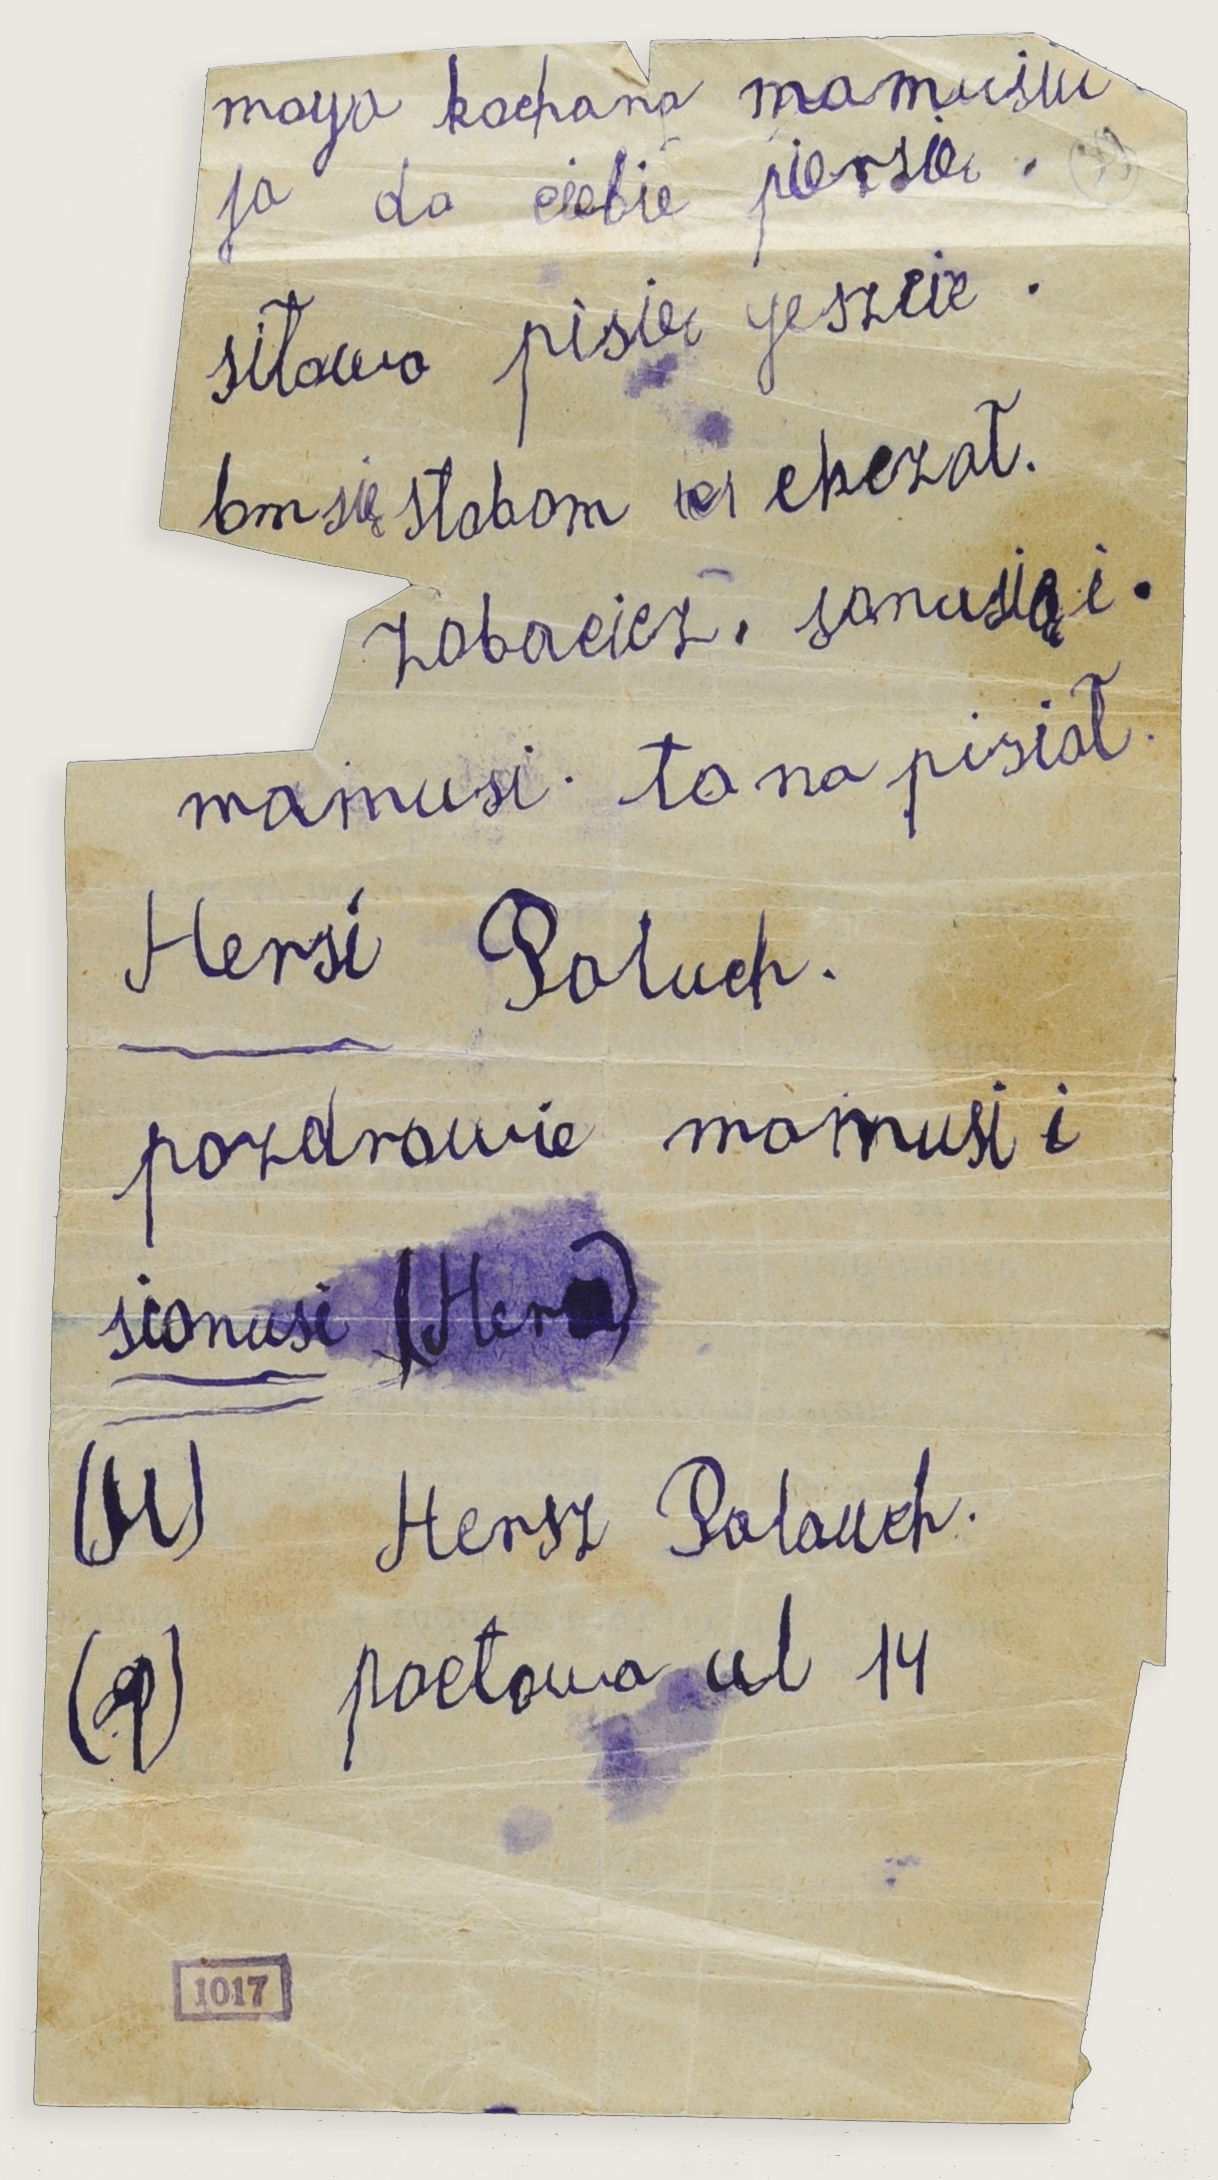 Last letter that 13-year-old Hersch Paluch sent to his mother Helena